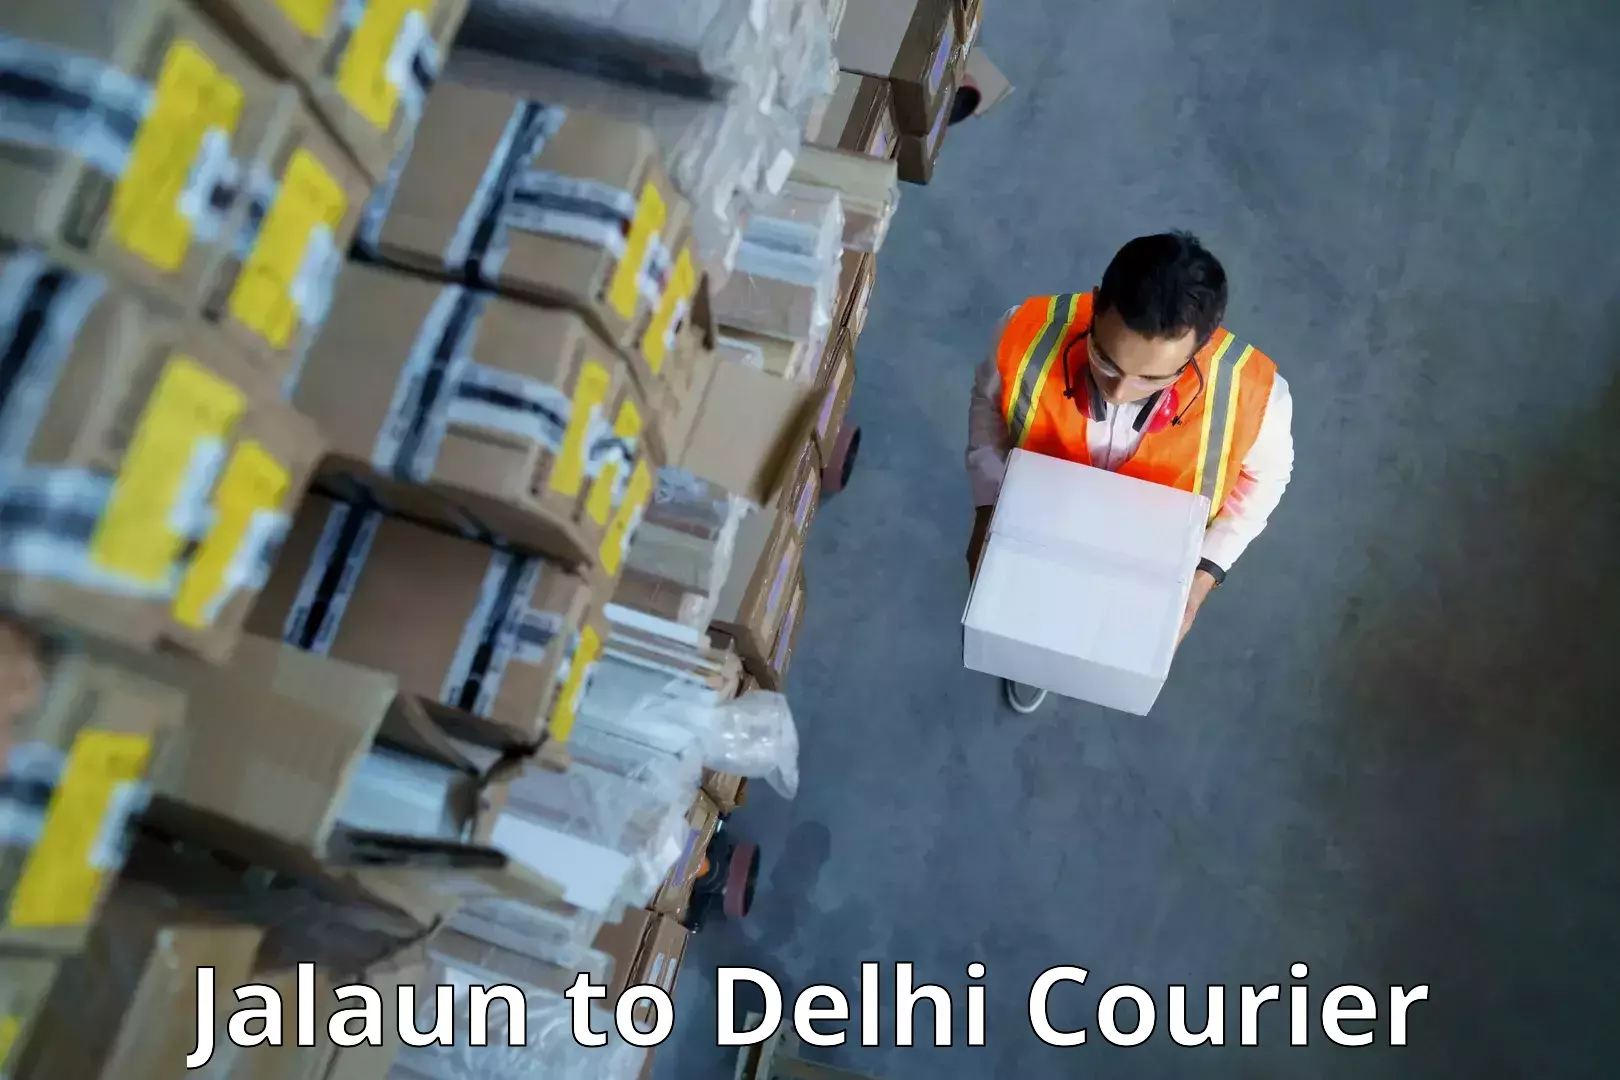 Courier service innovation Jalaun to Lodhi Road